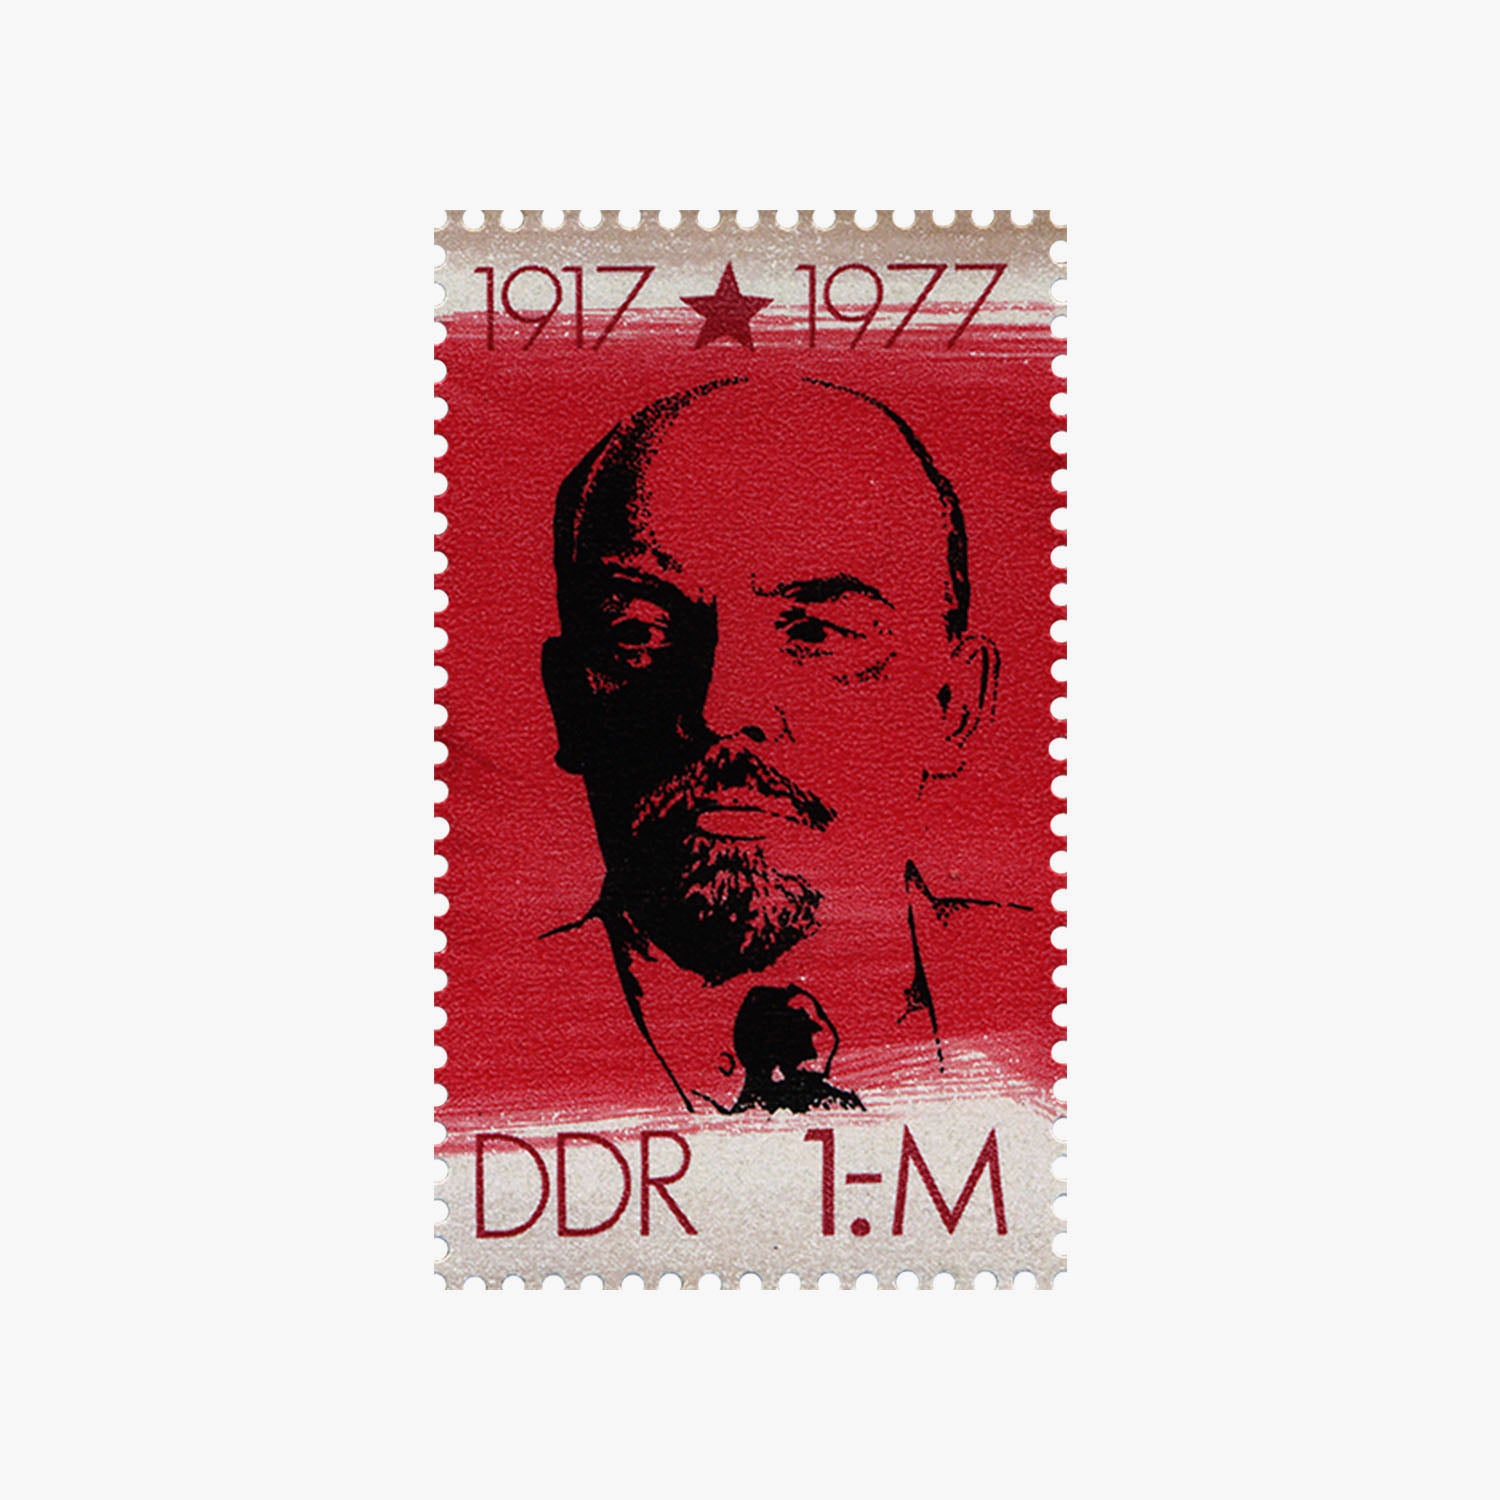 Lenin coin, stamp and banknote collection